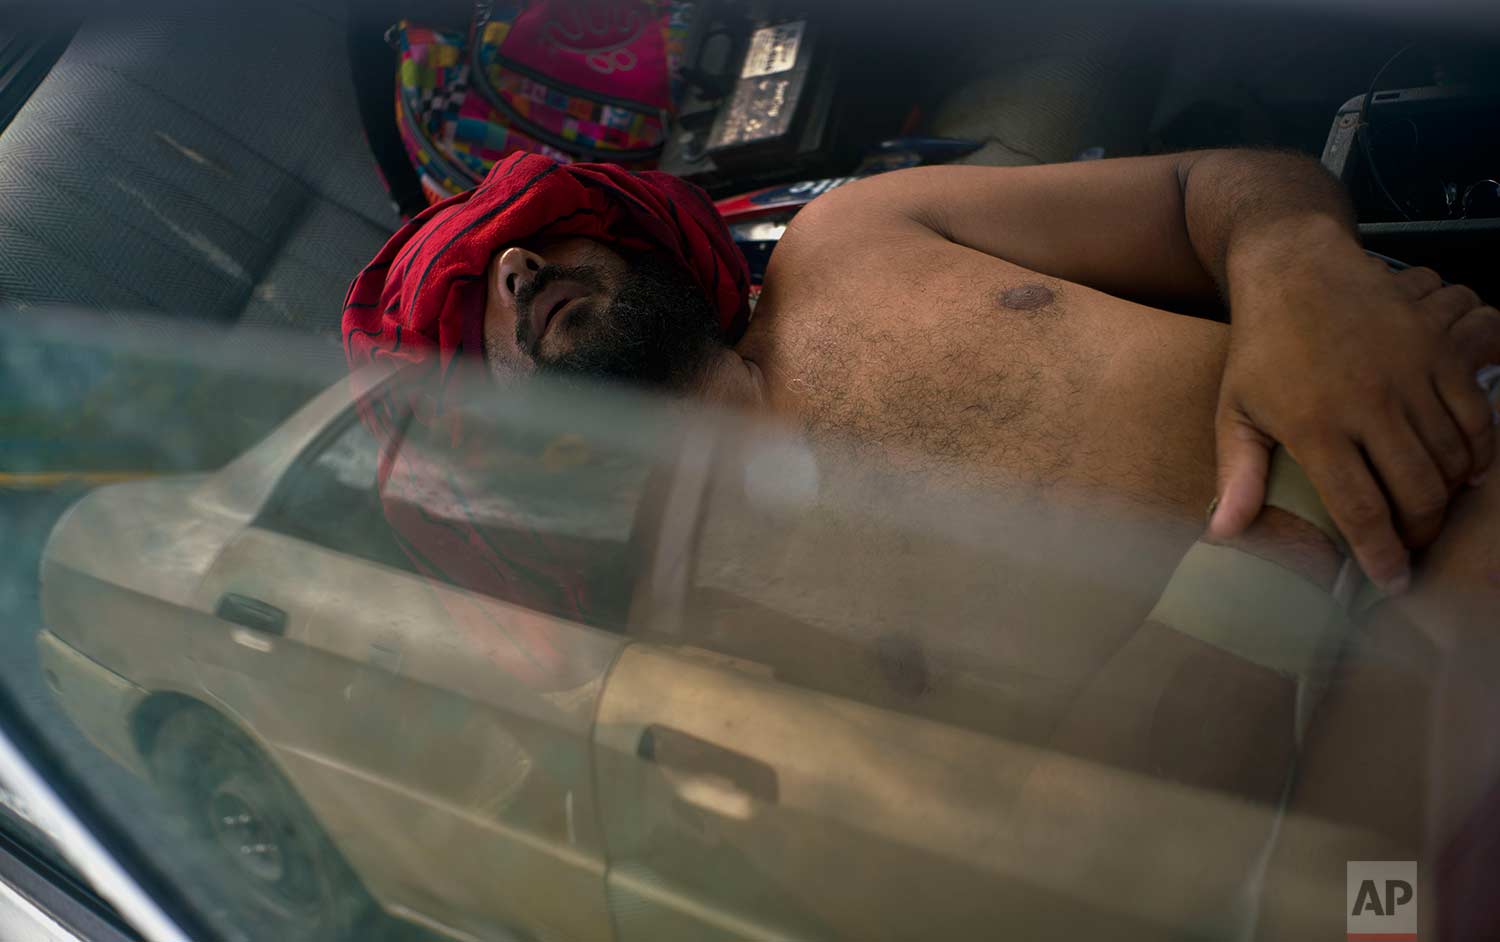  In this Saturday, Oct. 14, 2017 photo, Arturo de Jesus Melendez sleeps in his car with a shirt over his eyes, after he couldn't sleep in the school-turned-shelter due to the noise in Toa Baja, Puerto Rico. (AP Photo/Ramon Espinosa) 